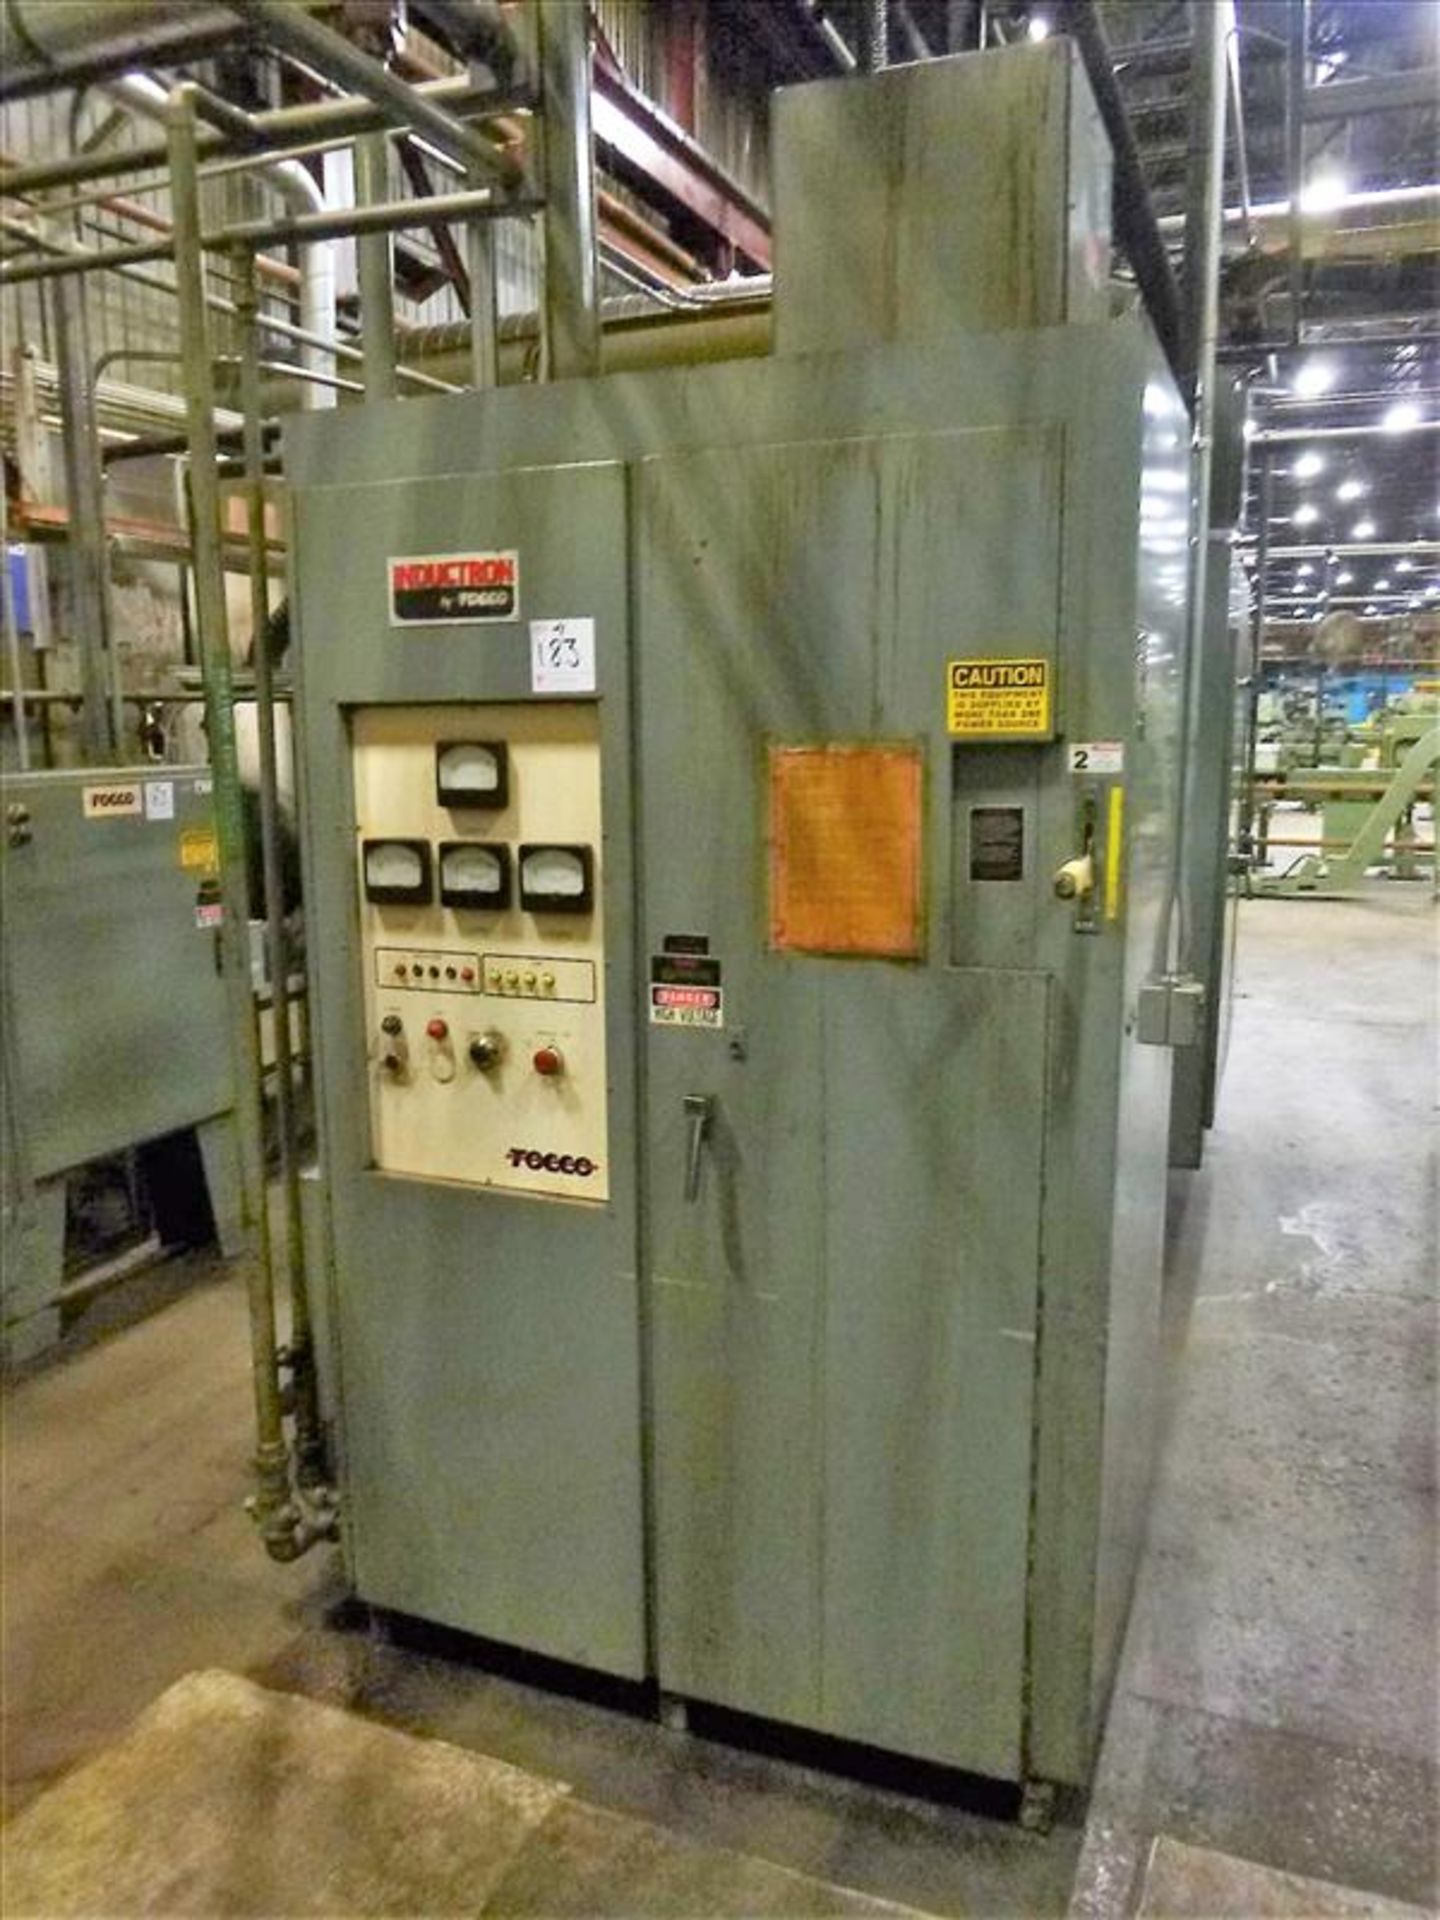 TOCCO Hardener Unit w/ TOCCOTRON 5EA 150 kw RF Generator, s/n 12-8313-16 c/w Distilled Water, - Image 12 of 23